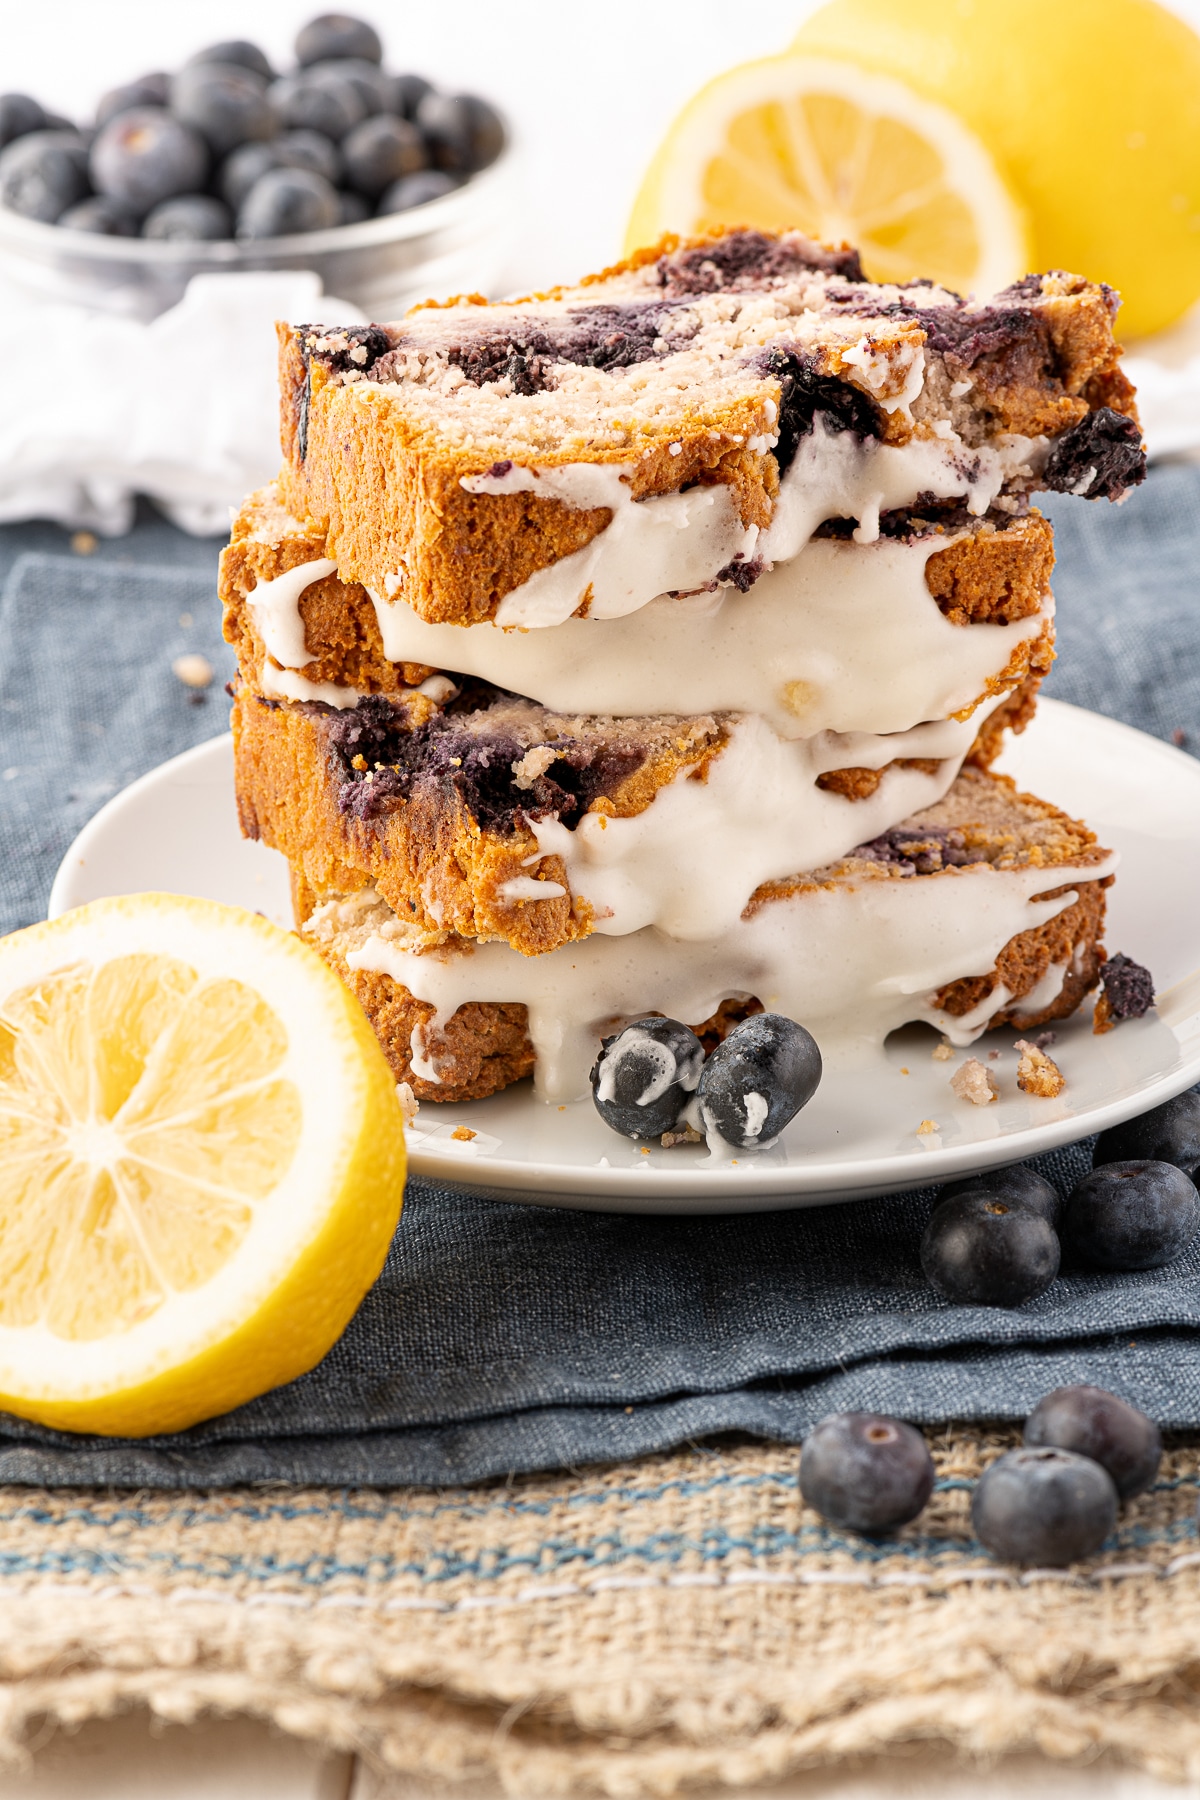 A tall stack of keto blueberry bread slices, with sliced lemon and blueberries in the foreground.